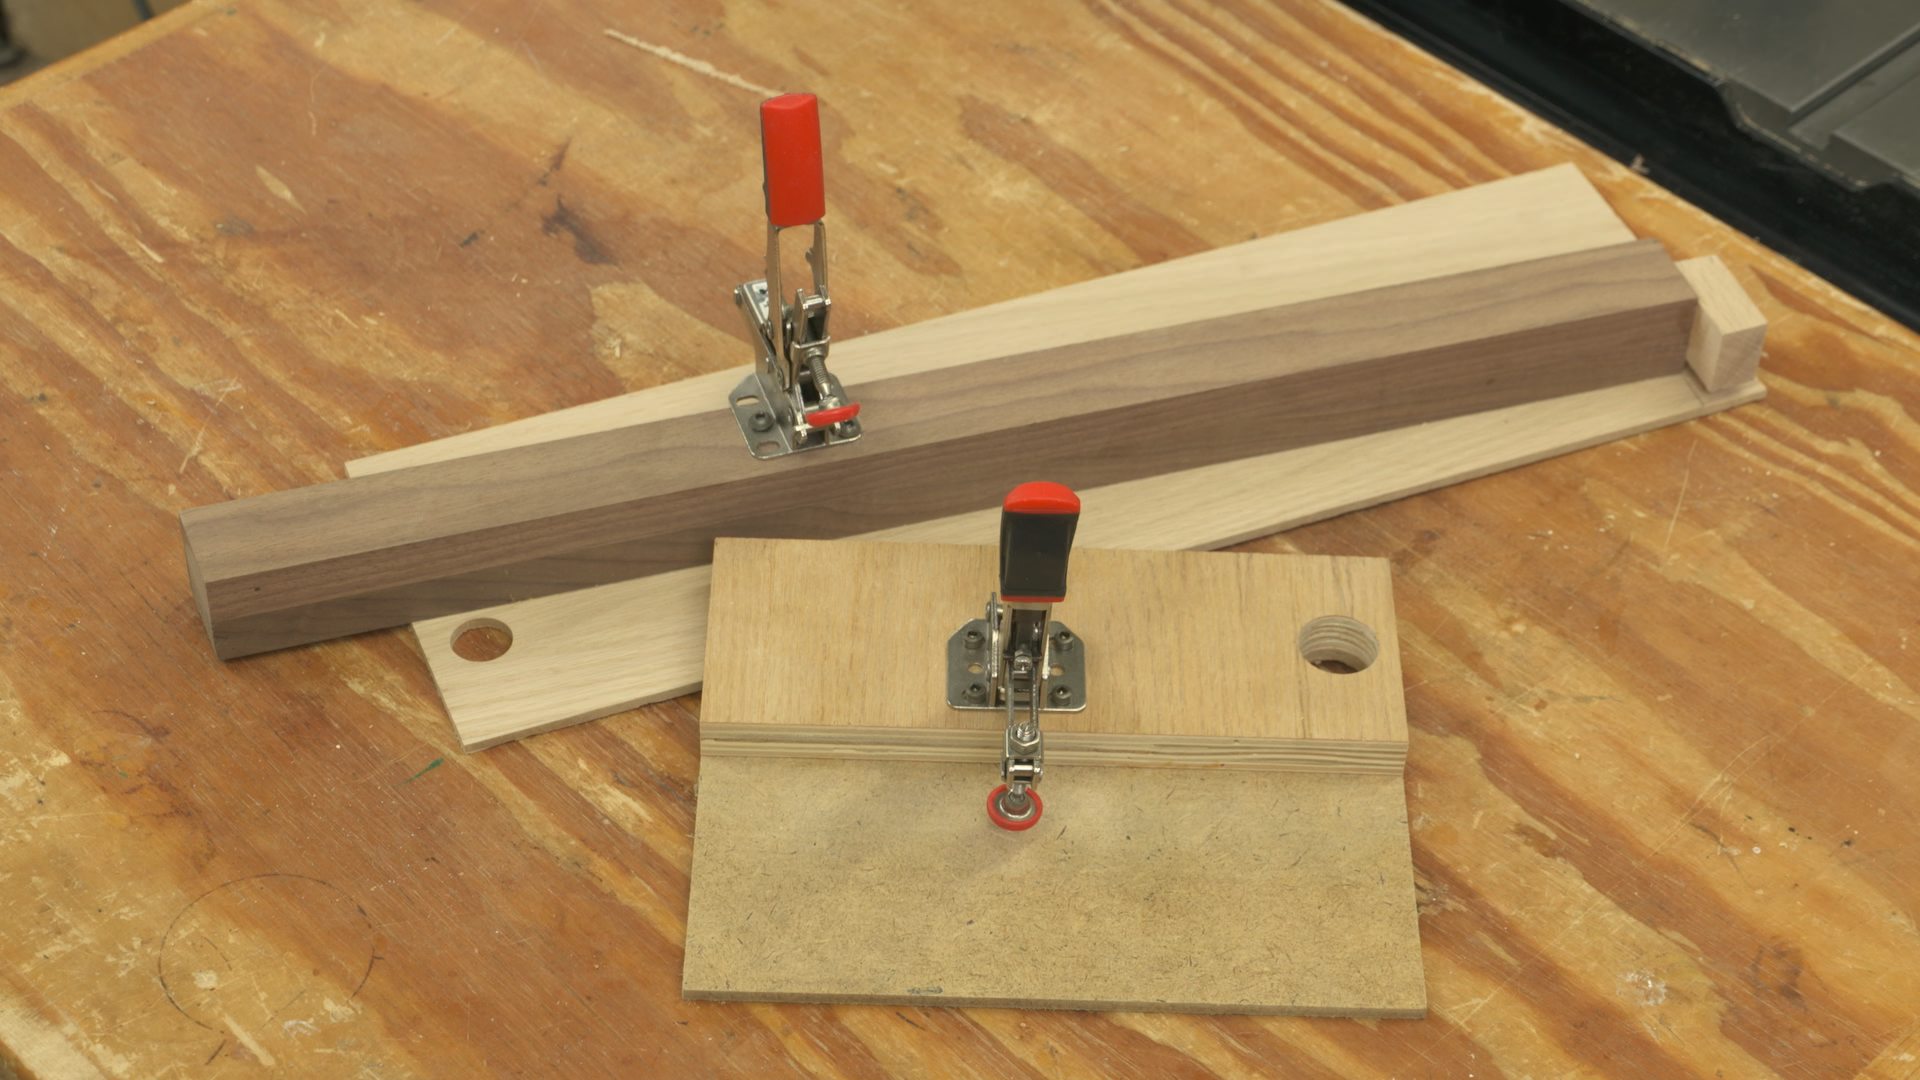 Using toggle clamps